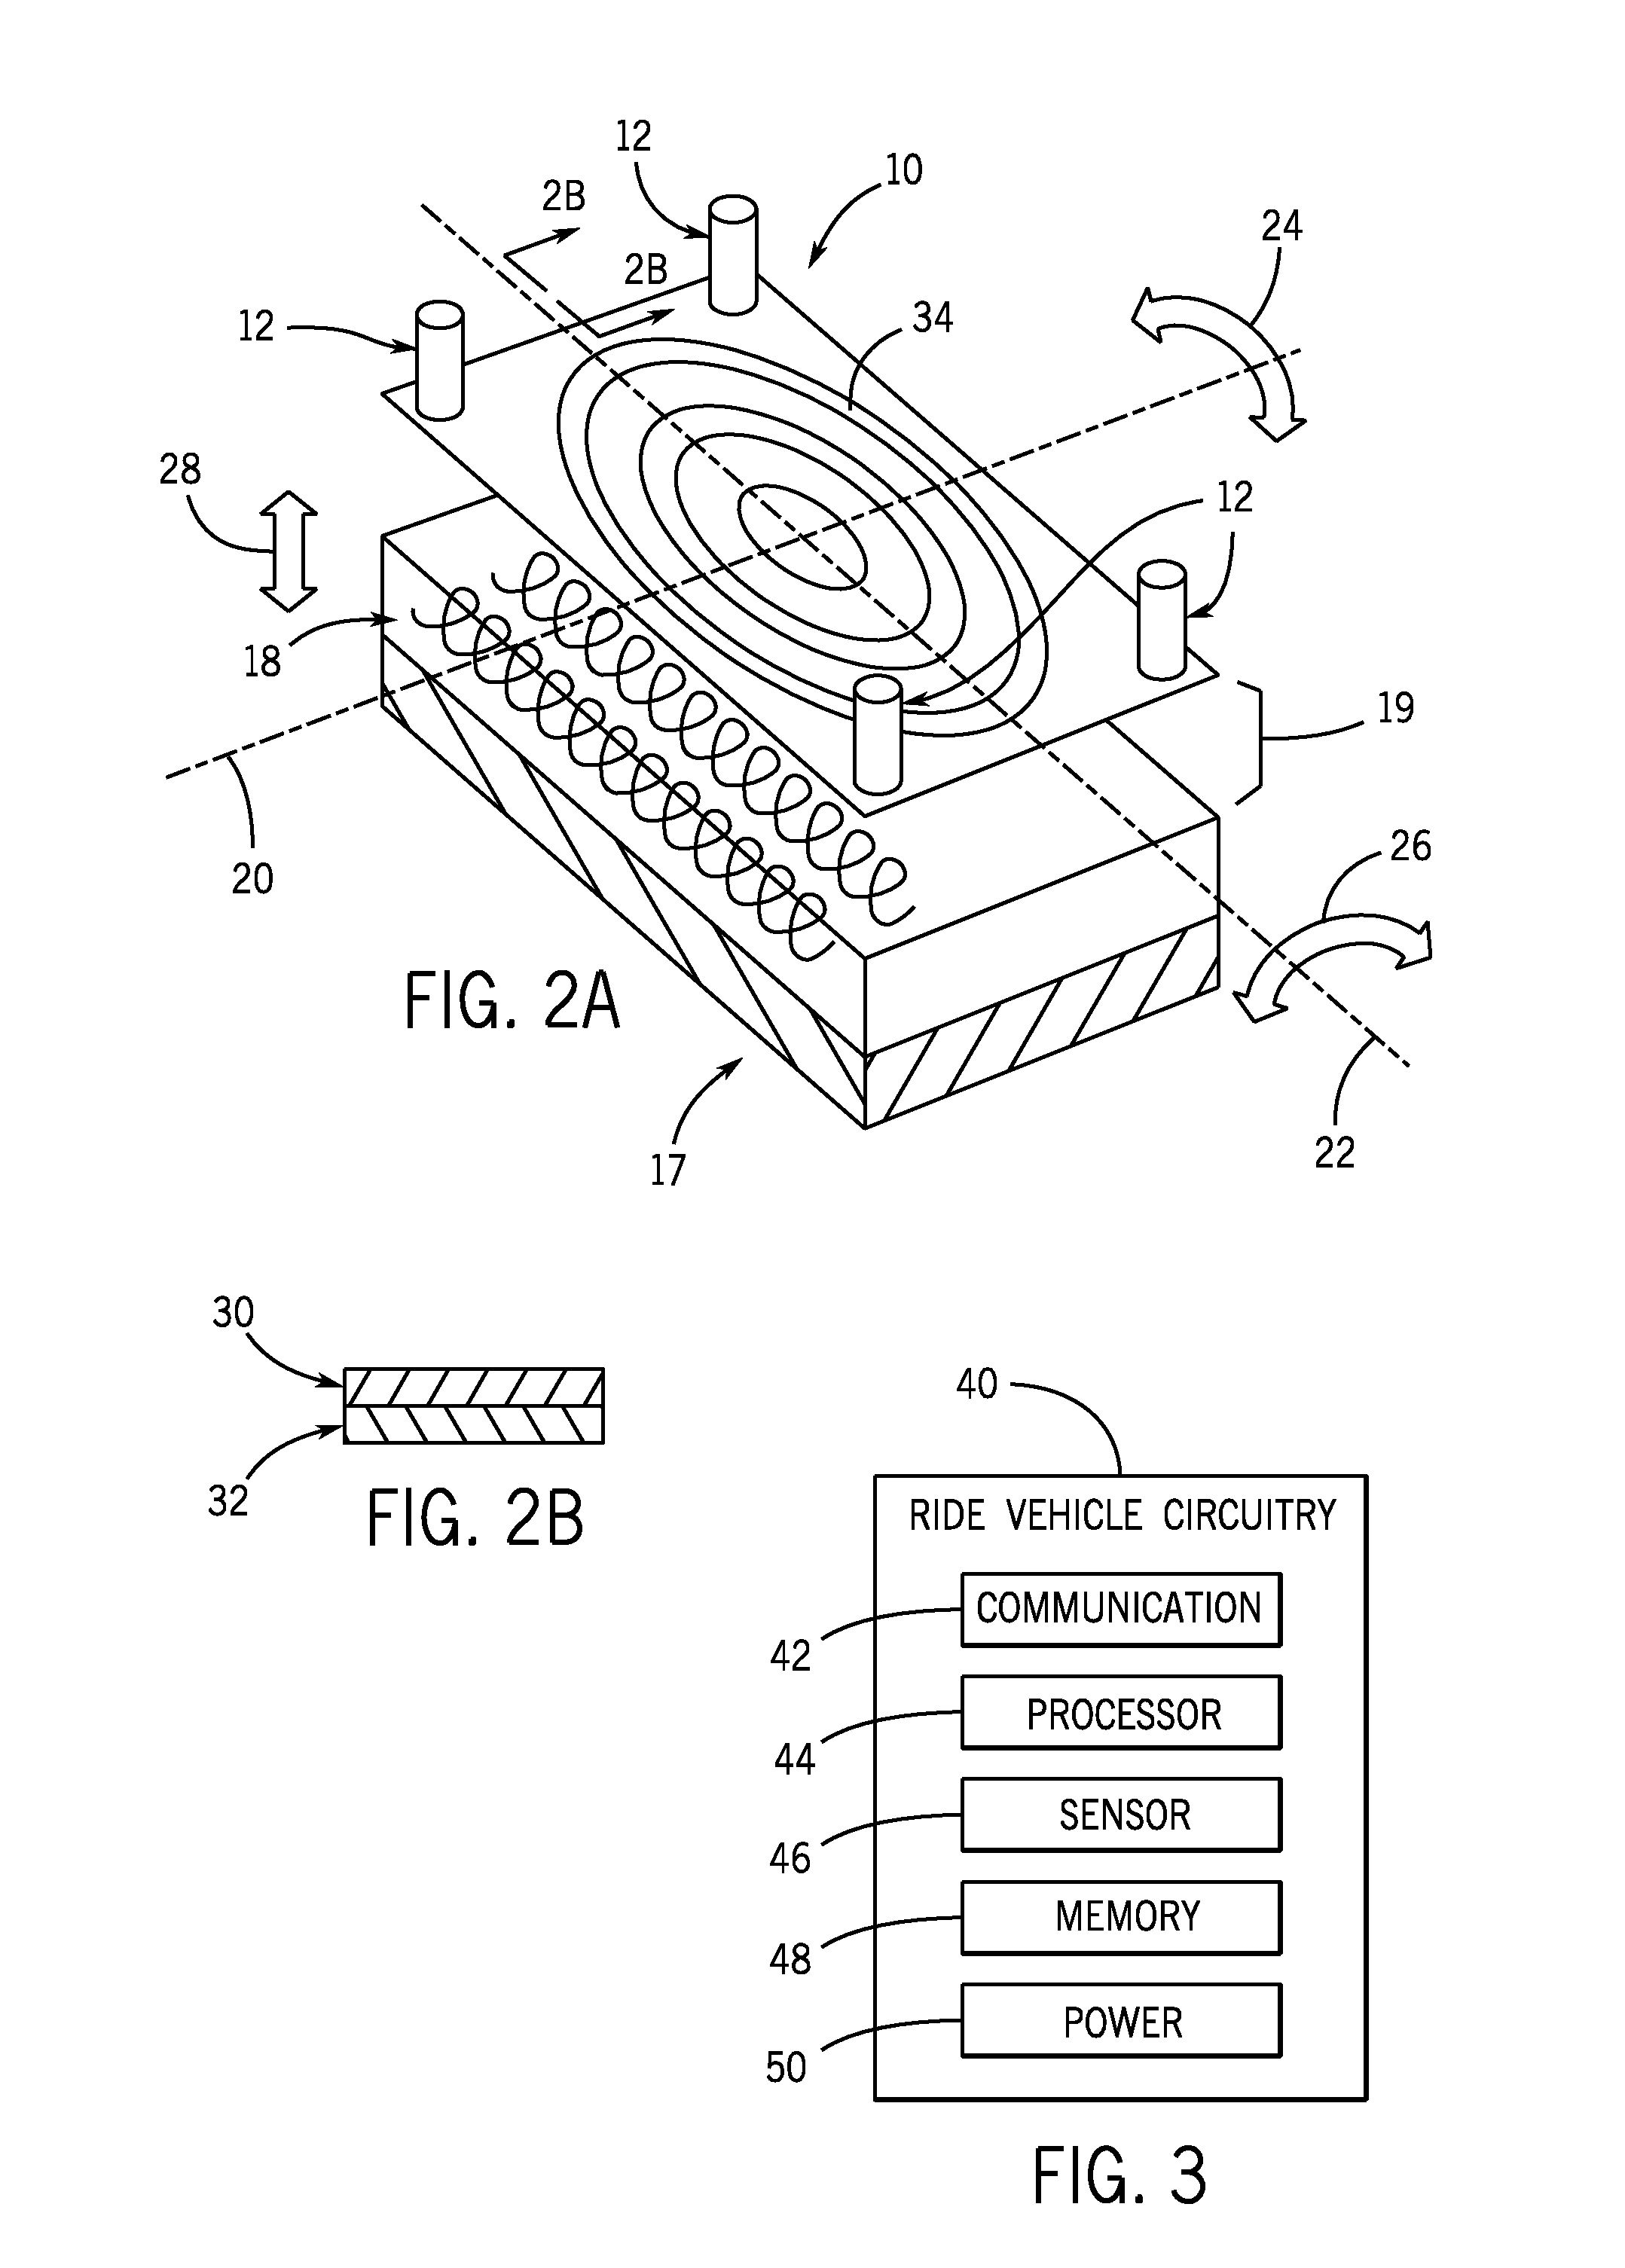 Systems and methods for braking or launching a ride vehicle